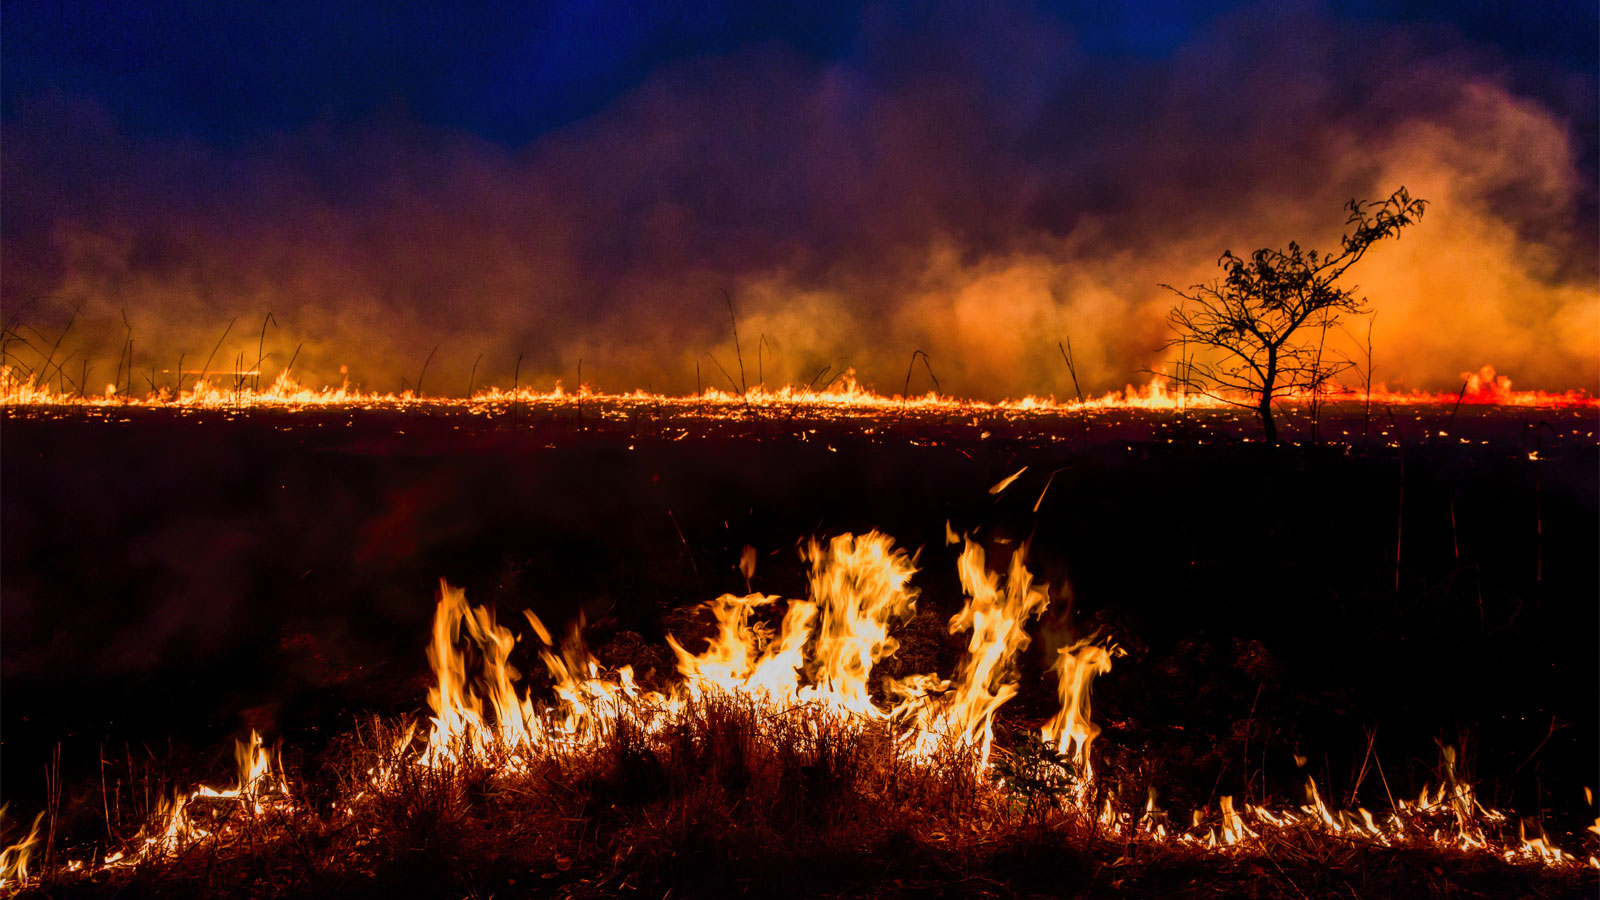 Flames and fire in a burnt field with orange smoke rising in the dark blue sky